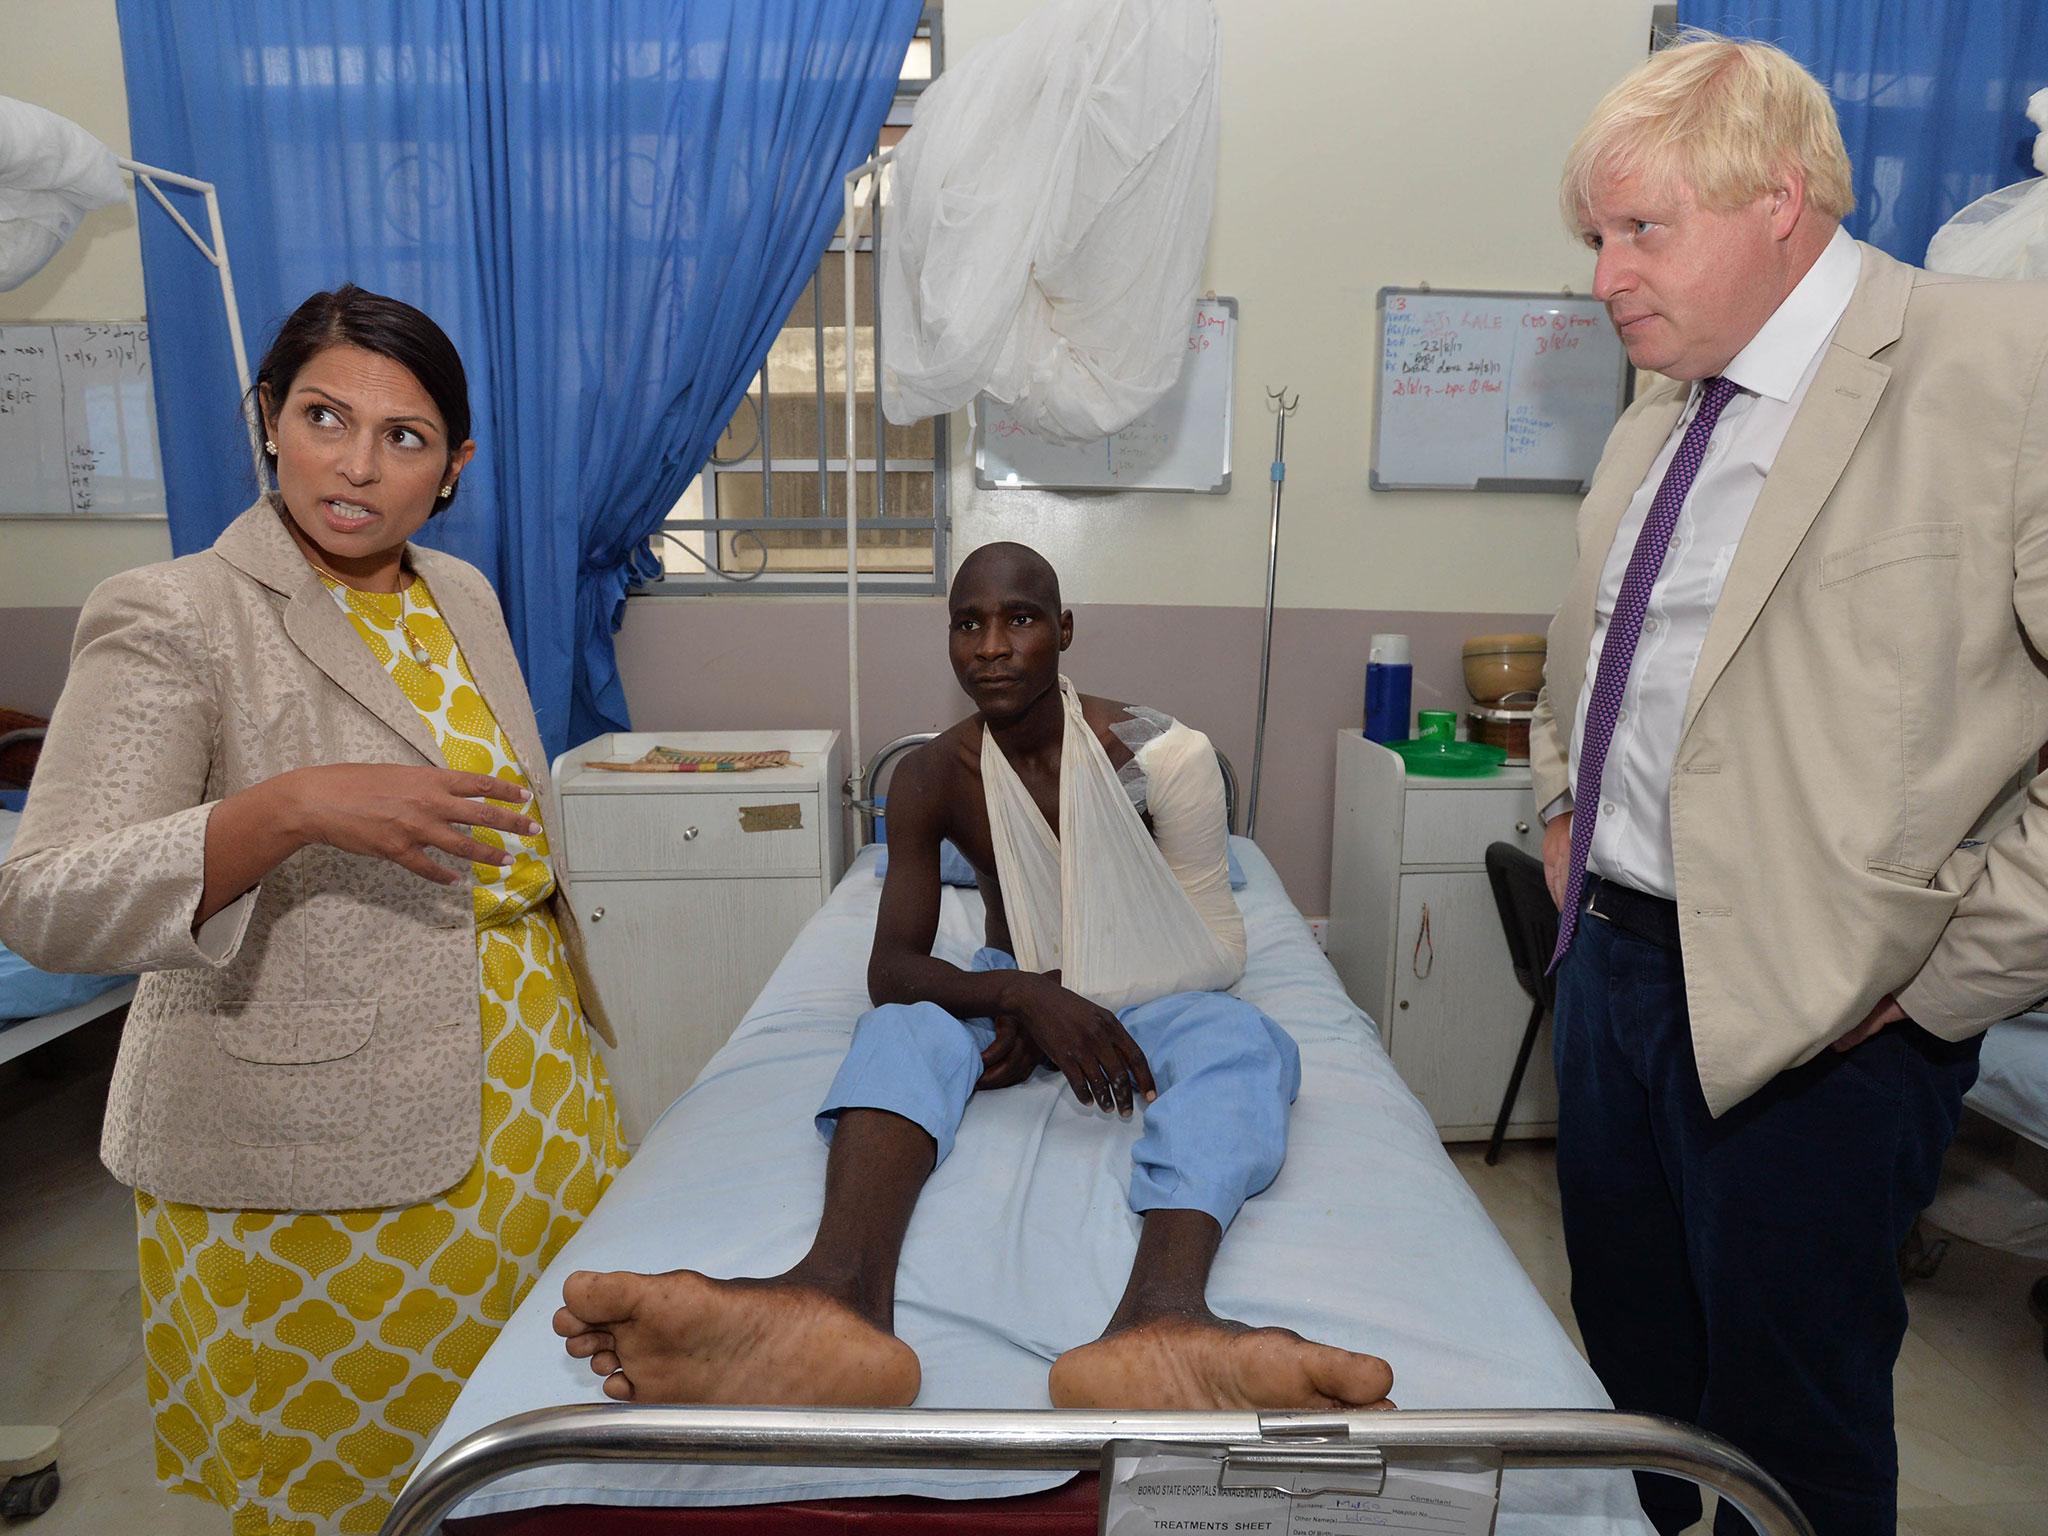 Minister Priti Patel visited Nigeria to witness the impact of human trafficking first hand